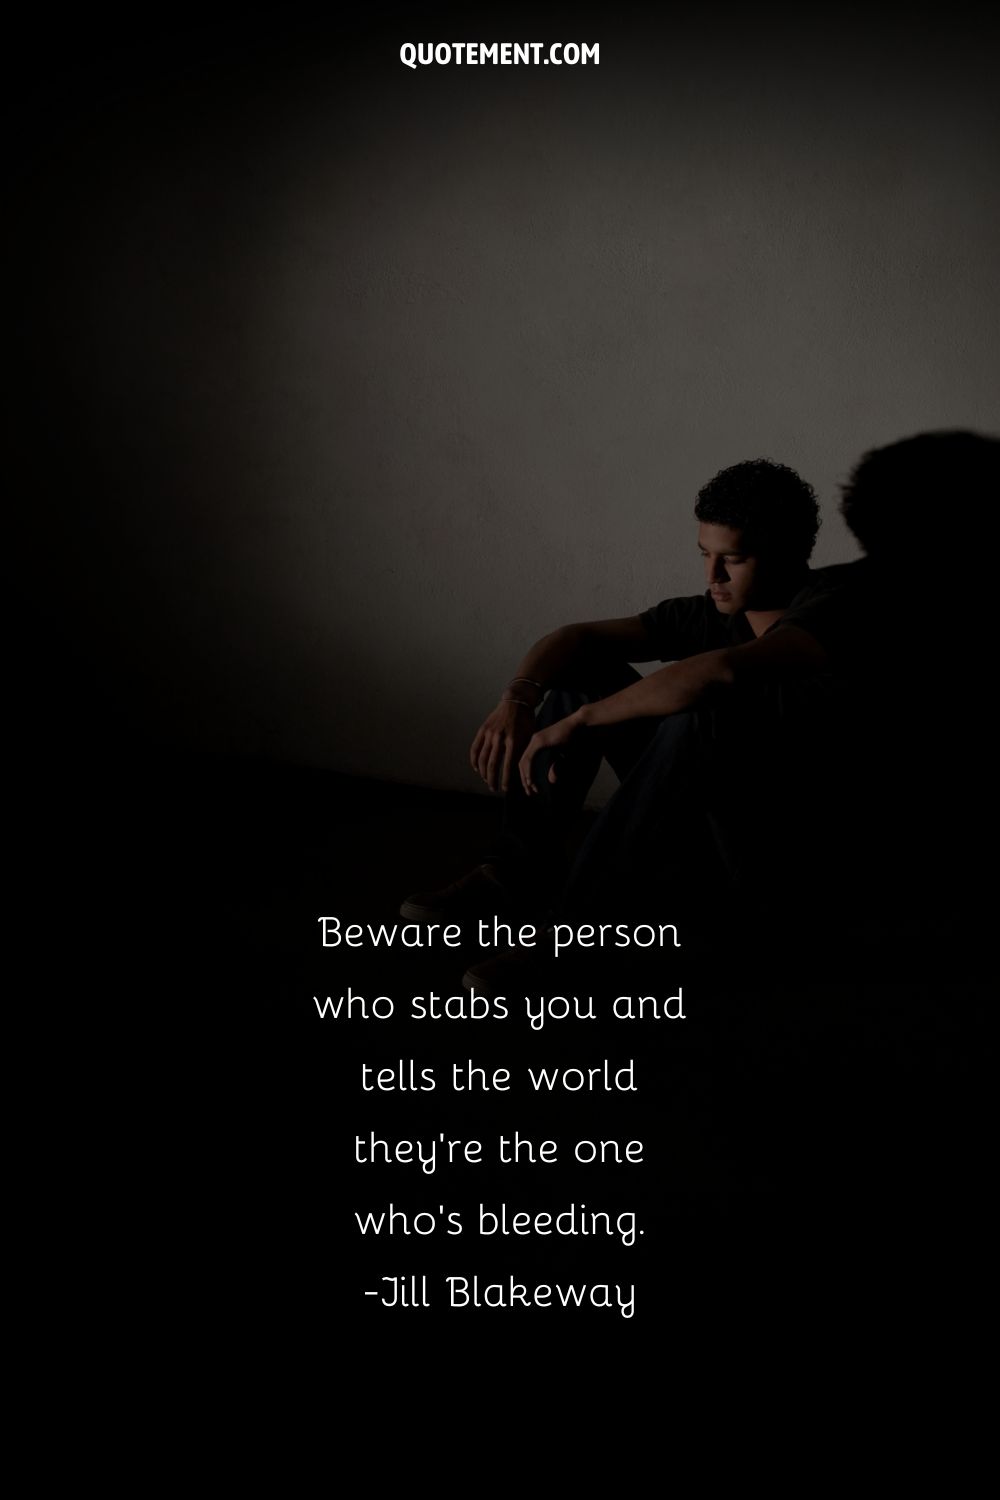 Beware the person who stabs you and tells the world they’re the one who’s bleeding